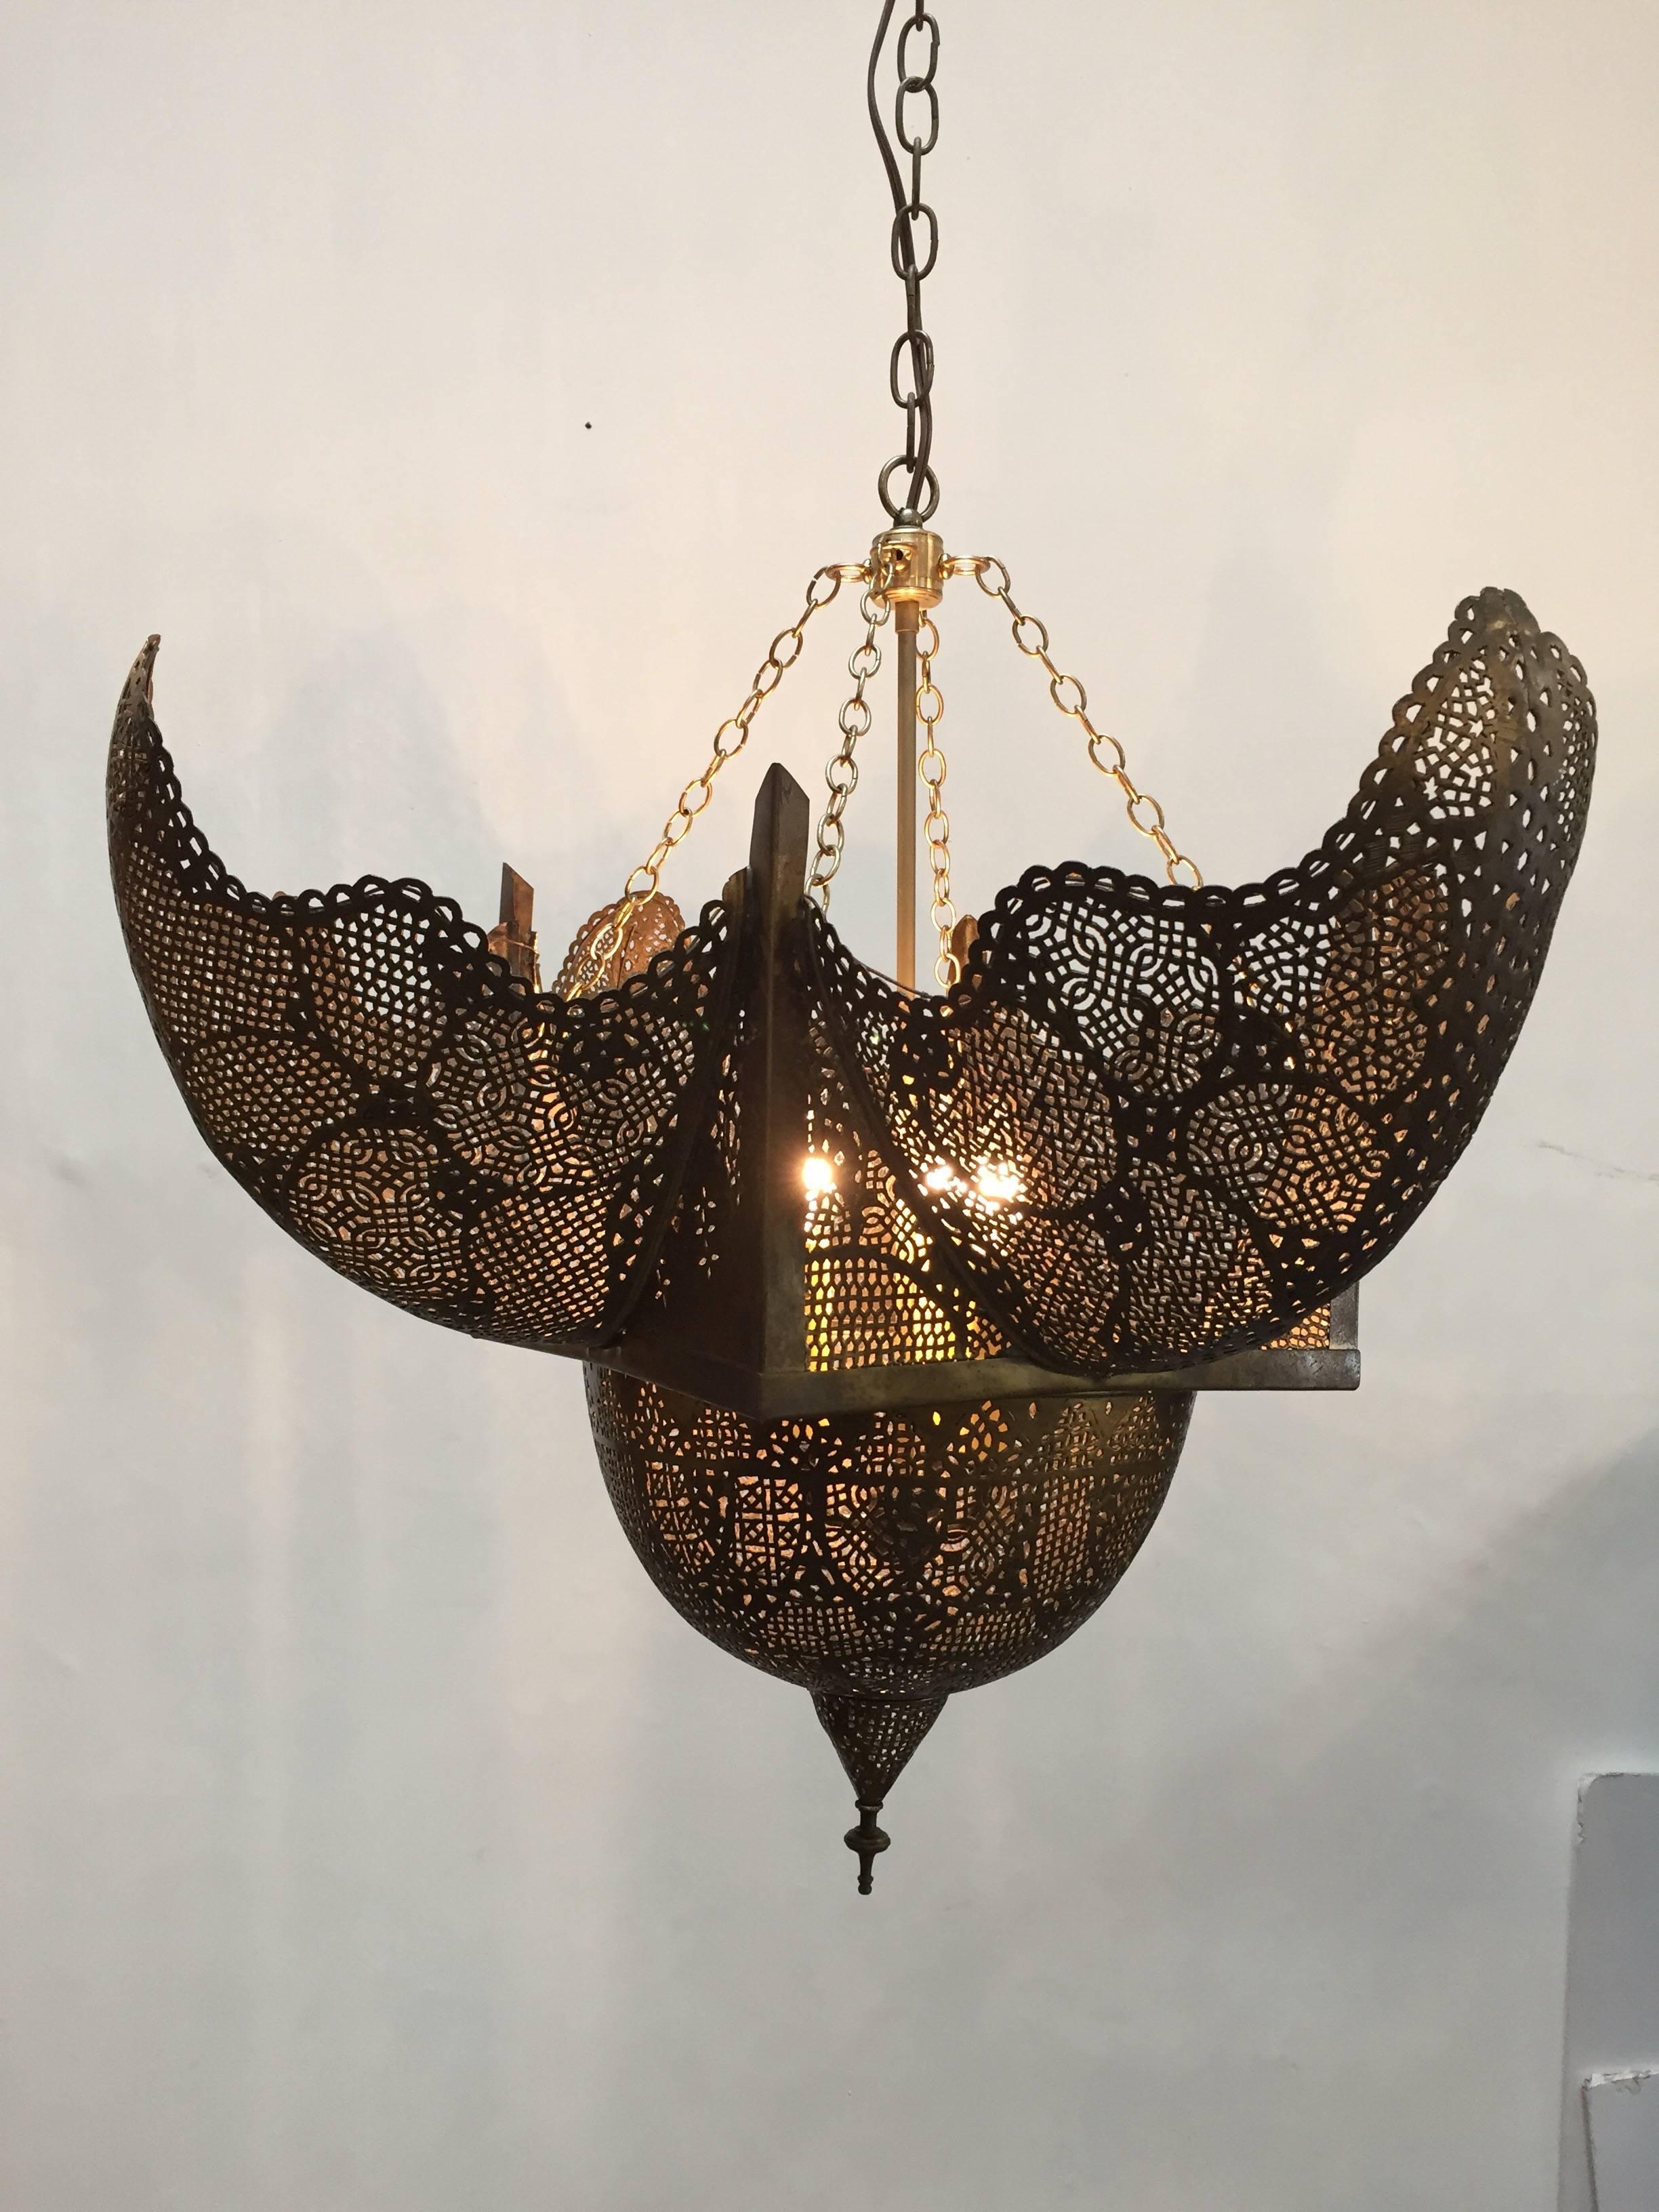 19th Century Middle Eastern large brass Ottoman Turkish hand crafted pierced hanging chandelier.
Unusual antique Arabic palm tree inverted shape with very fine Moorish Syrian filigree pierced geometric lattice work, nice patina.
Great to use for